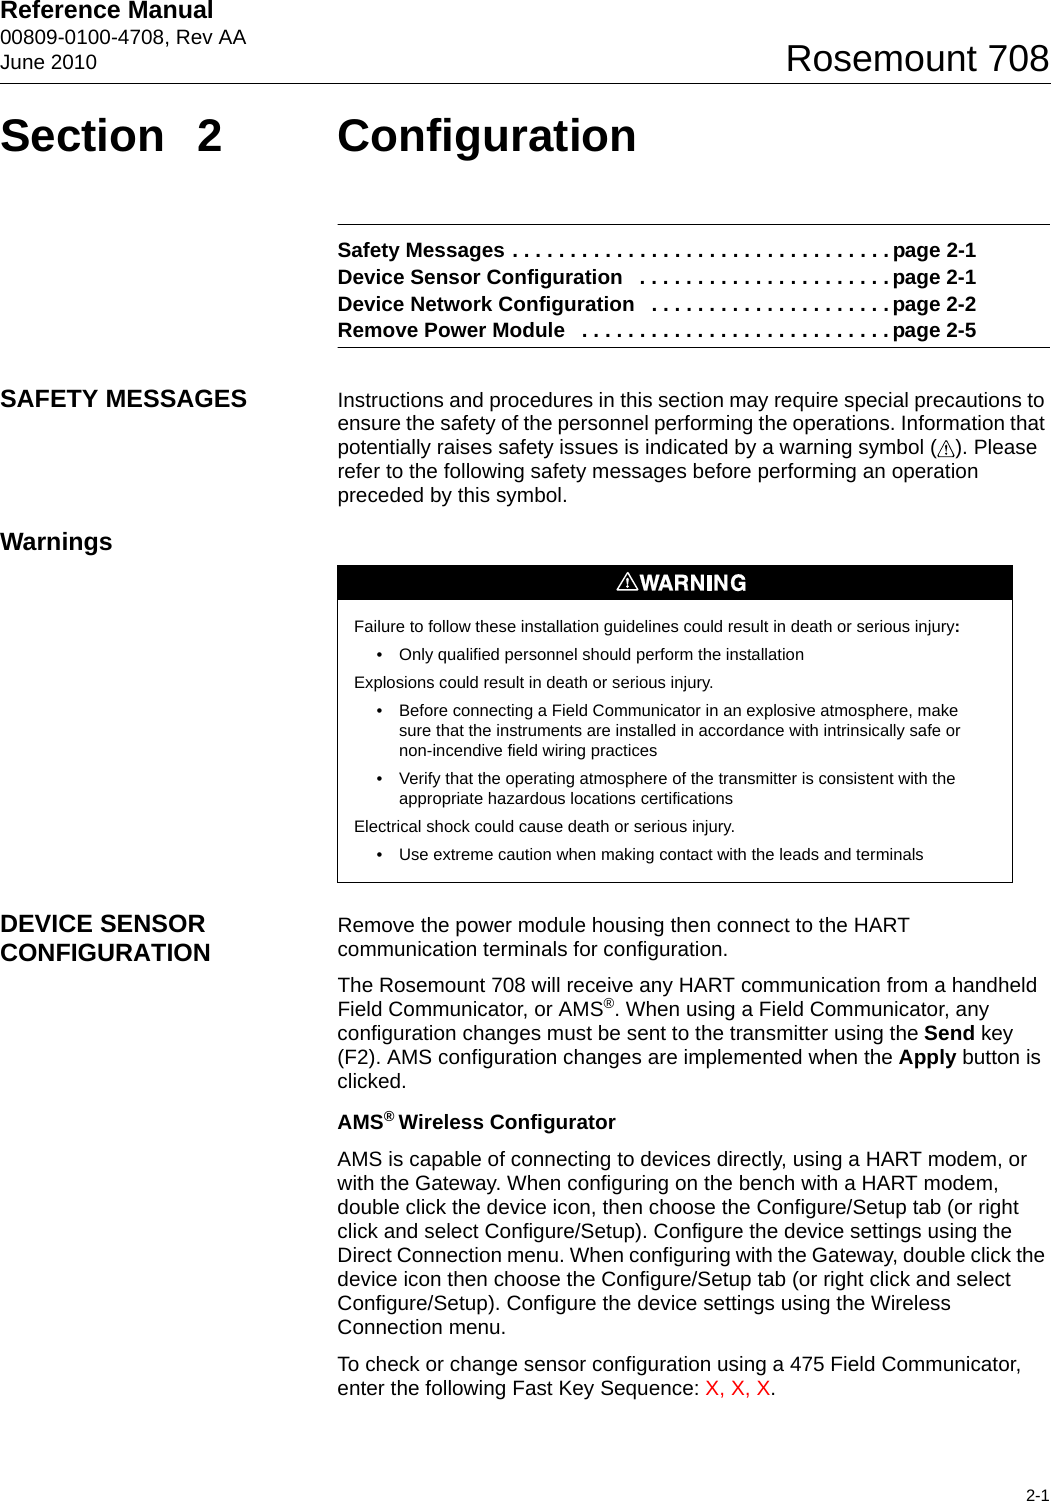 Reference Manual 00809-0100-4708, Rev AAJune 20102-1Rosemount 708Section 2 ConfigurationSafety Messages . . . . . . . . . . . . . . . . . . . . . . . . . . . . . . . . . page 2-1Device Sensor Configuration   . . . . . . . . . . . . . . . . . . . . . . page 2-1Device Network Configuration   . . . . . . . . . . . . . . . . . . . . . page 2-2Remove Power Module   . . . . . . . . . . . . . . . . . . . . . . . . . . . page 2-5SAFETY MESSAGES Instructions and procedures in this section may require special precautions to ensure the safety of the personnel performing the operations. Information that potentially raises safety issues is indicated by a warning symbol ( ). Please refer to the following safety messages before performing an operation preceded by this symbol.WarningsDEVICE SENSOR CONFIGURATION Remove the power module housing then connect to the HART communication terminals for configuration. The Rosemount 708 will receive any HART communication from a handheld Field Communicator, or AMS®. When using a Field Communicator, any configuration changes must be sent to the transmitter using the Send key (F2). AMS configuration changes are implemented when the Apply button is clicked.AMS® Wireless ConfiguratorAMS is capable of connecting to devices directly, using a HART modem, or with the Gateway. When configuring on the bench with a HART modem, double click the device icon, then choose the Configure/Setup tab (or right click and select Configure/Setup). Configure the device settings using the Direct Connection menu. When configuring with the Gateway, double click the device icon then choose the Configure/Setup tab (or right click and select Configure/Setup). Configure the device settings using the Wireless Connection menu.To check or change sensor configuration using a 475 Field Communicator, enter the following Fast Key Sequence: X, X, X.Failure to follow these installation guidelines could result in death or serious injury: • Only qualified personnel should perform the installationExplosions could result in death or serious injury.• Before connecting a Field Communicator in an explosive atmosphere, make sure that the instruments are installed in accordance with intrinsically safe or non-incendive field wiring practices• Verify that the operating atmosphere of the transmitter is consistent with the appropriate hazardous locations certificationsElectrical shock could cause death or serious injury.• Use extreme caution when making contact with the leads and terminals